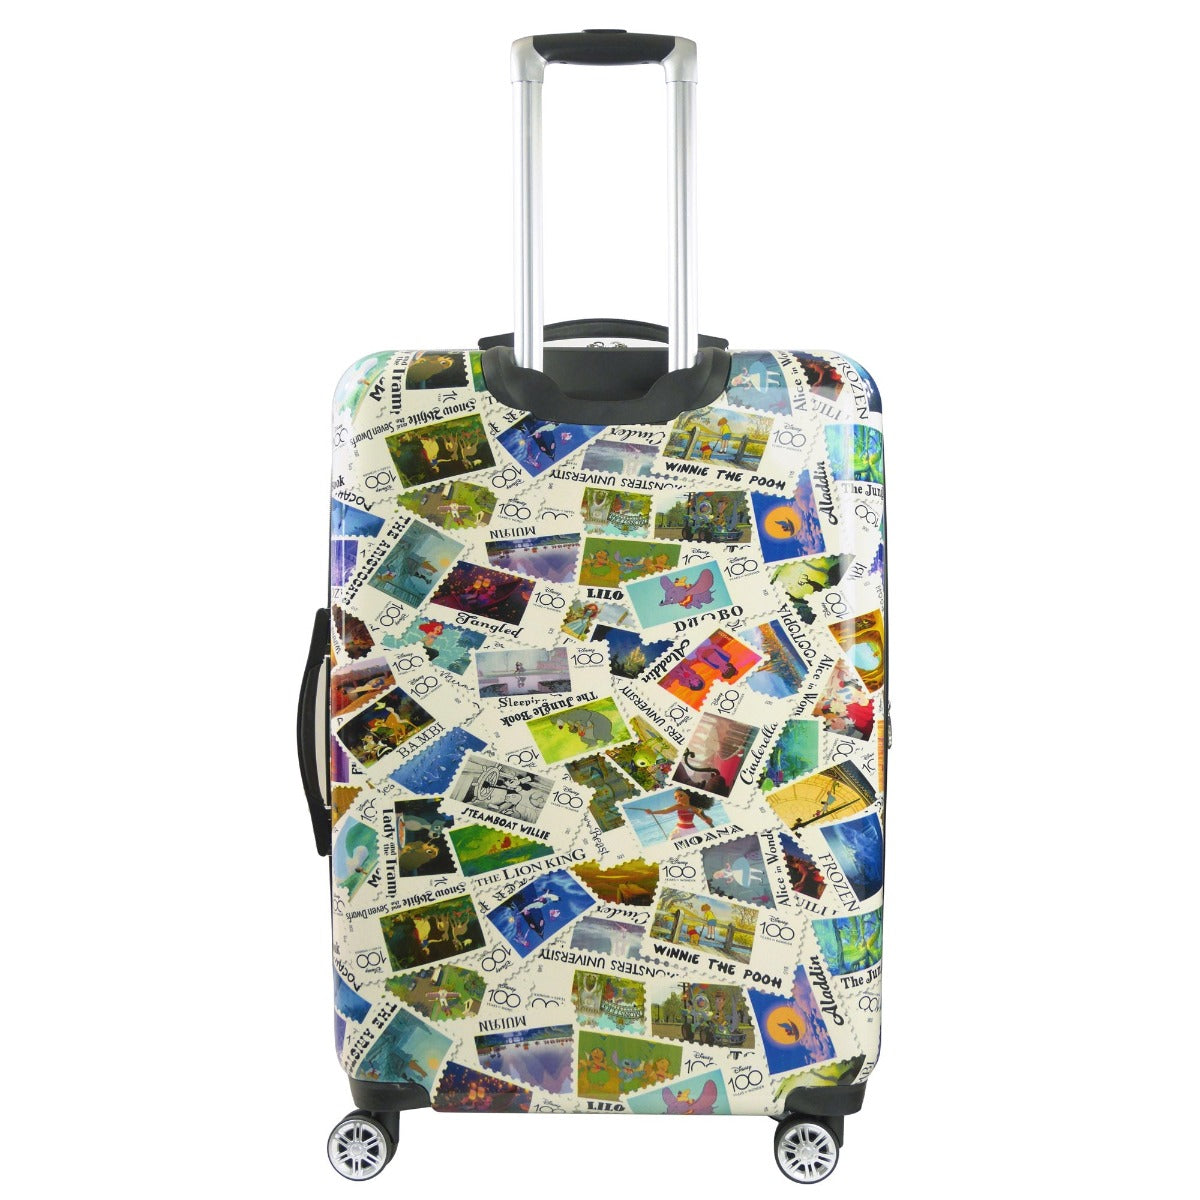 Disney 100 Years Anniversary Stamps limited edition hardshell rolling checked luggage by Ful